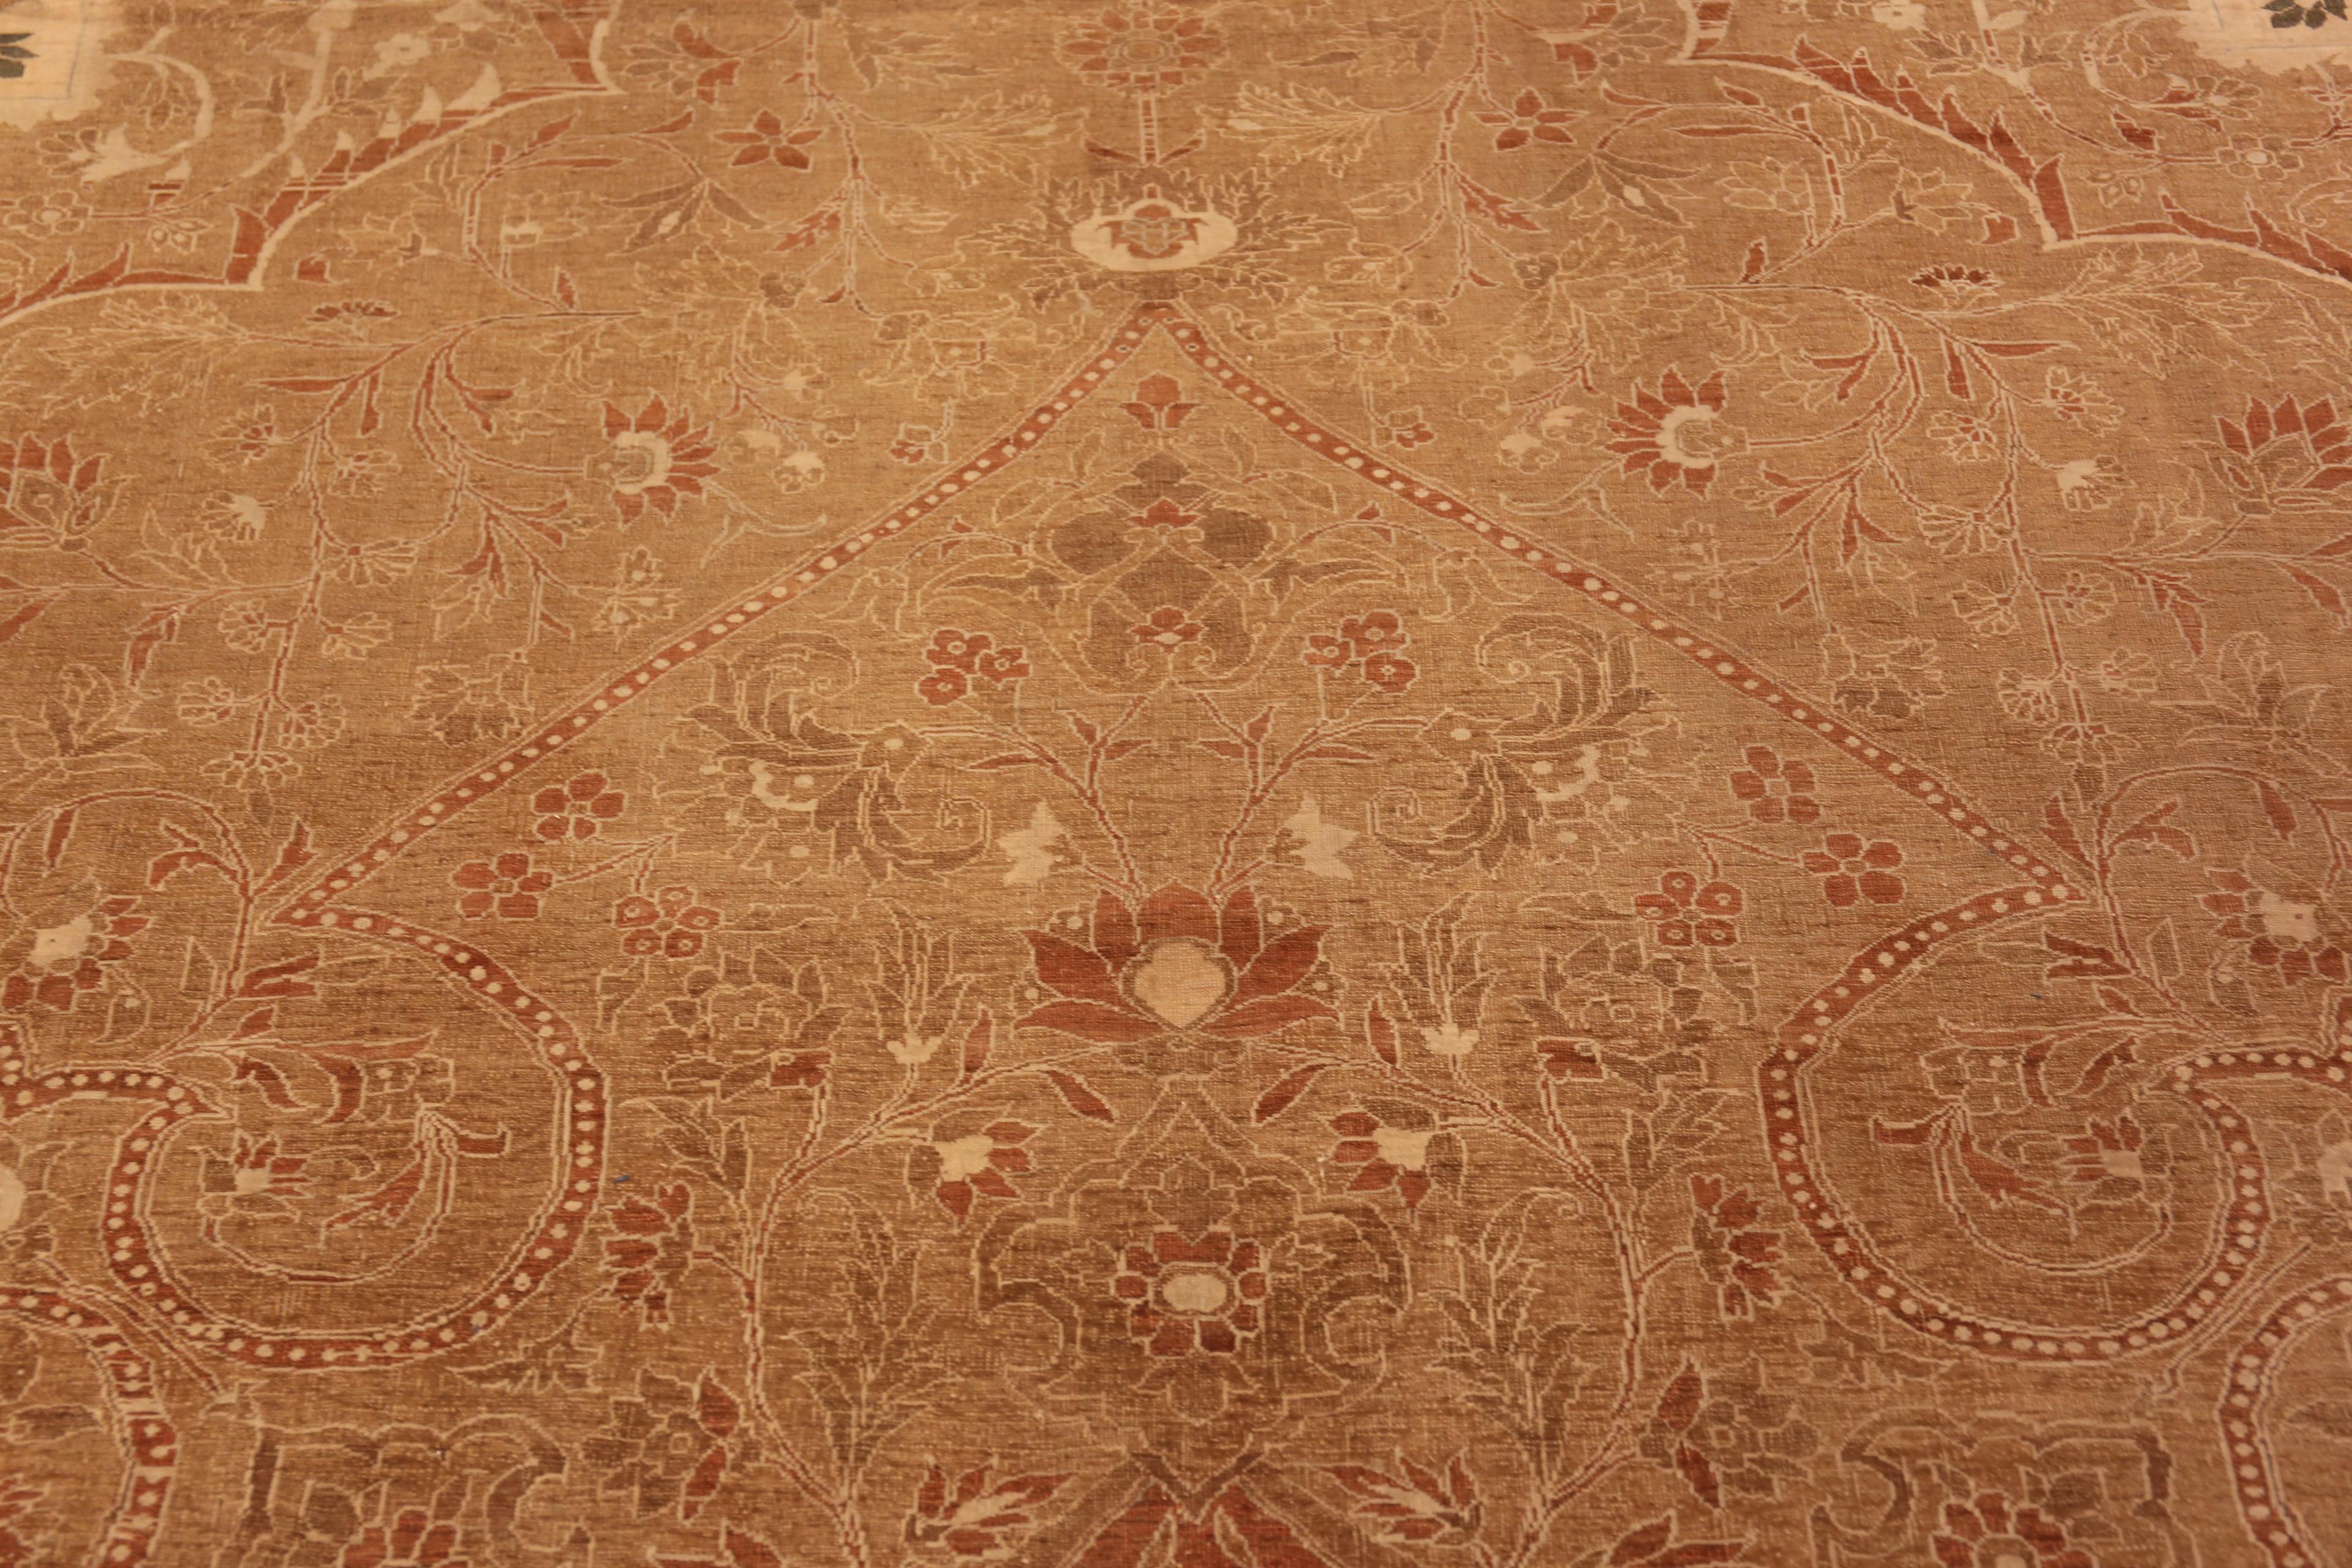 19th Century Rare Wool and Cotton Pile Fine Weave Antique Persian Tabriz Rug 10'9